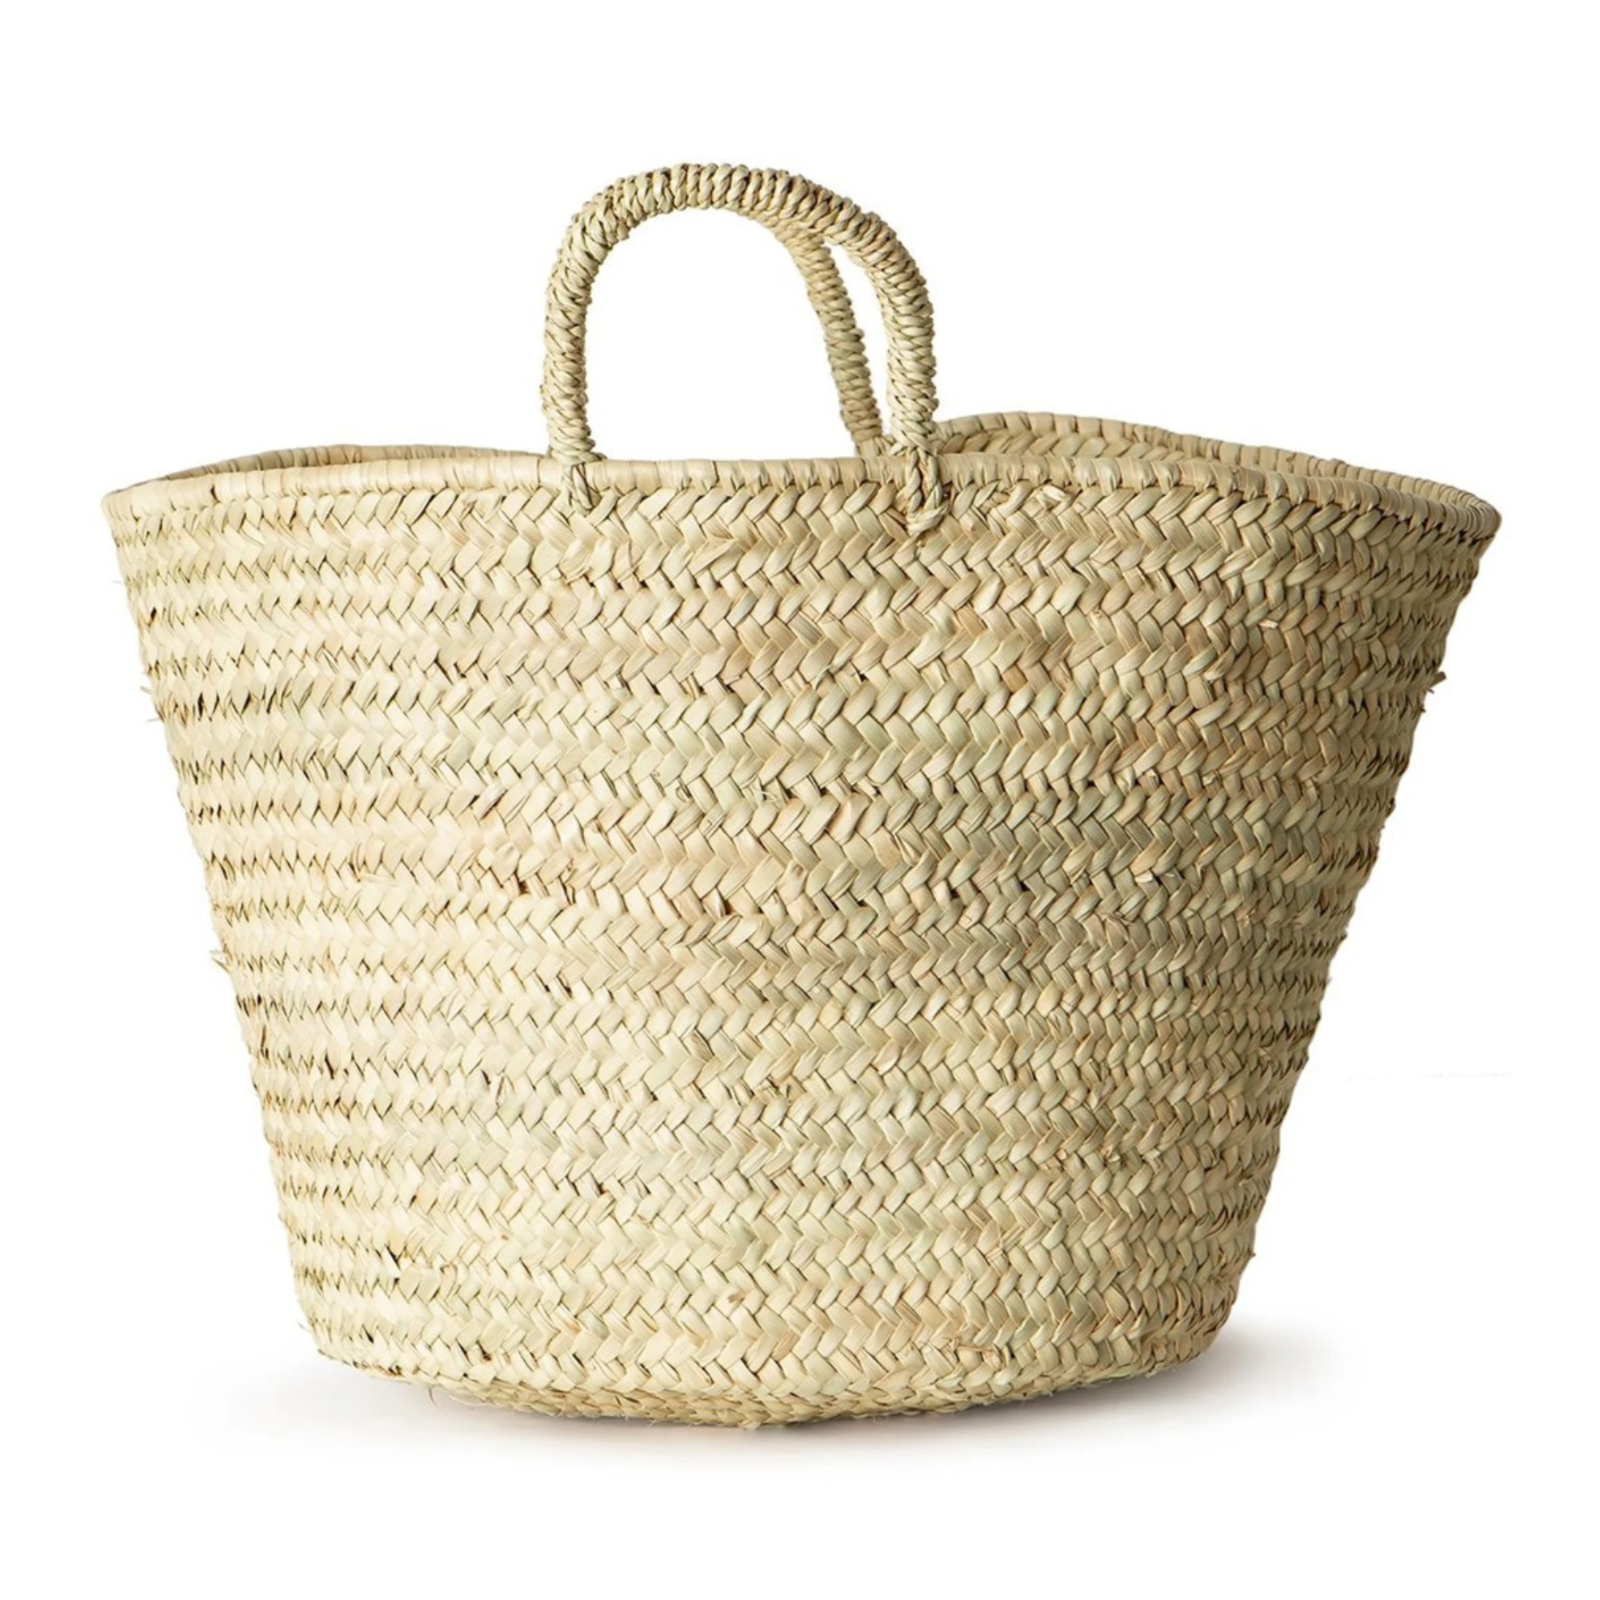 Handwoven Wall Basket Tall Large French Basket,Straw Tote Bag ,Straw Summer Bag